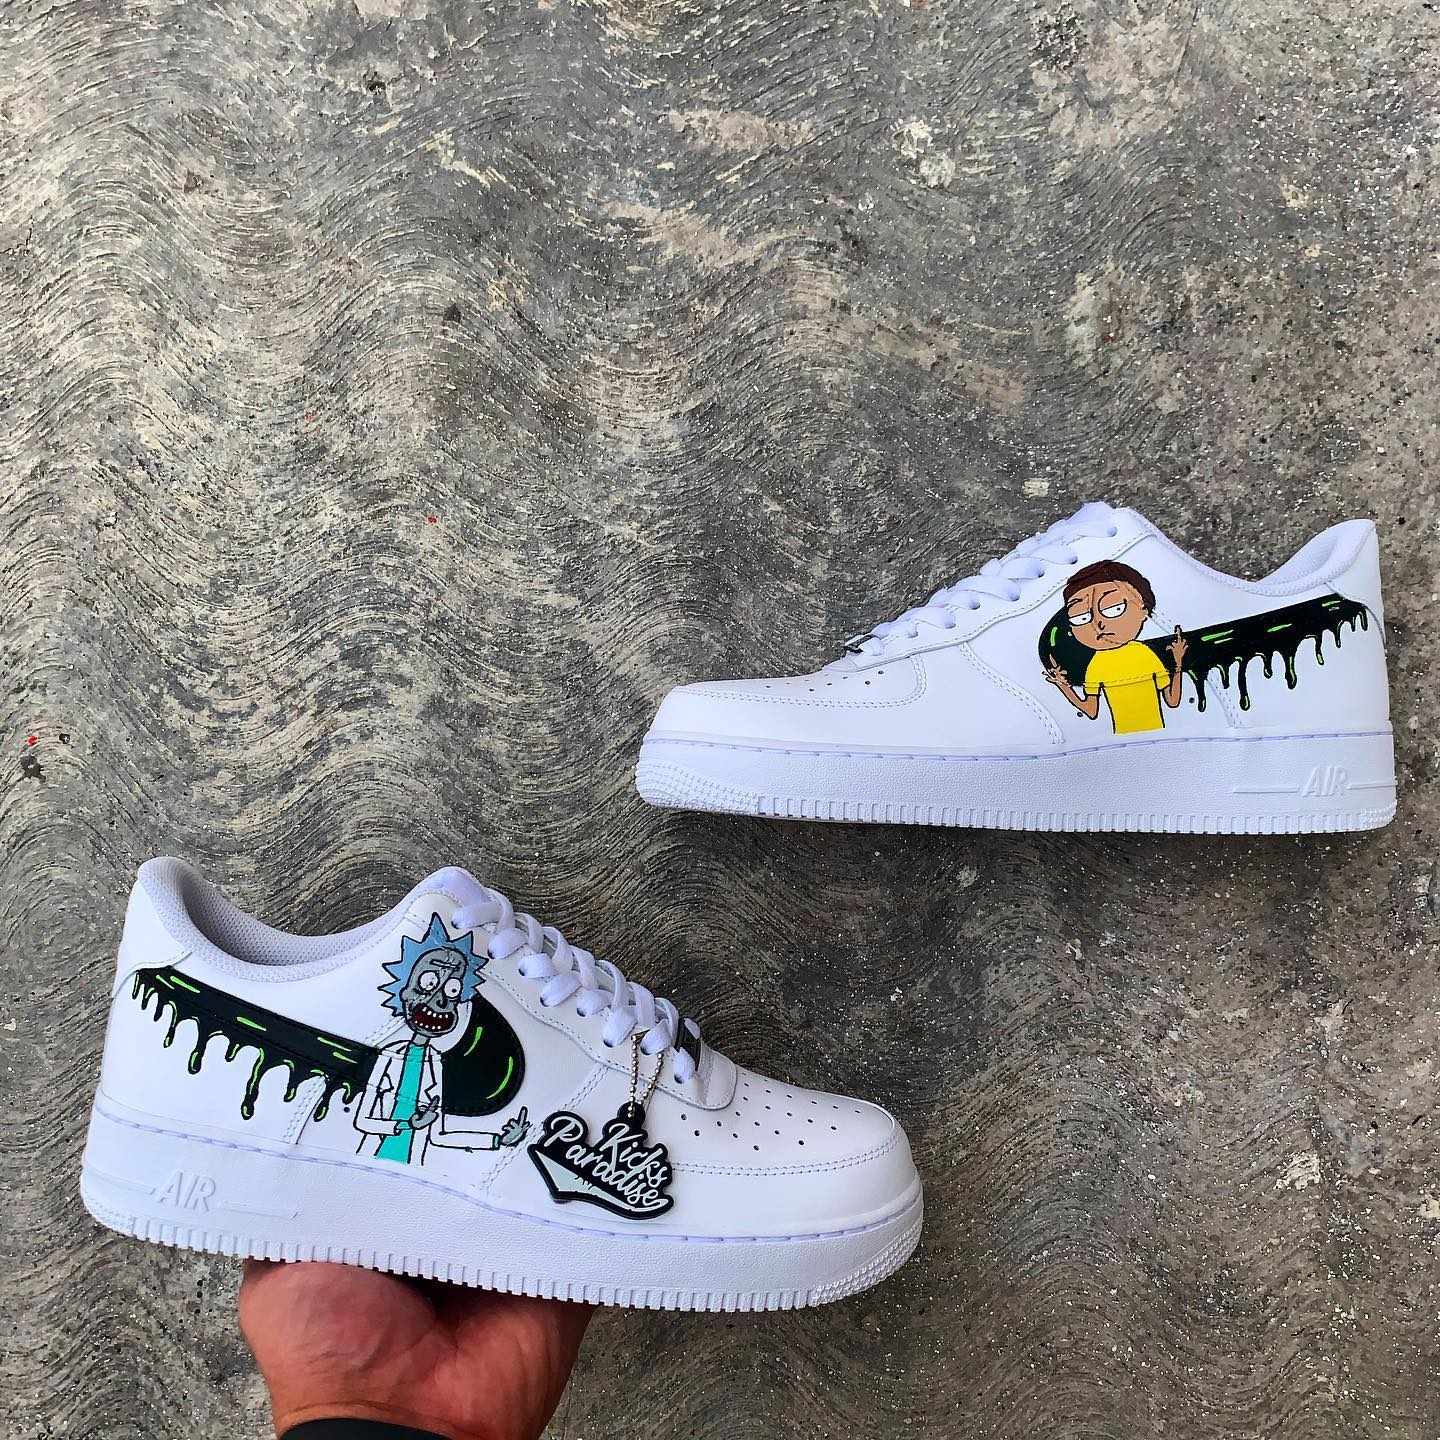 rick and morty air force 1 drip creationz